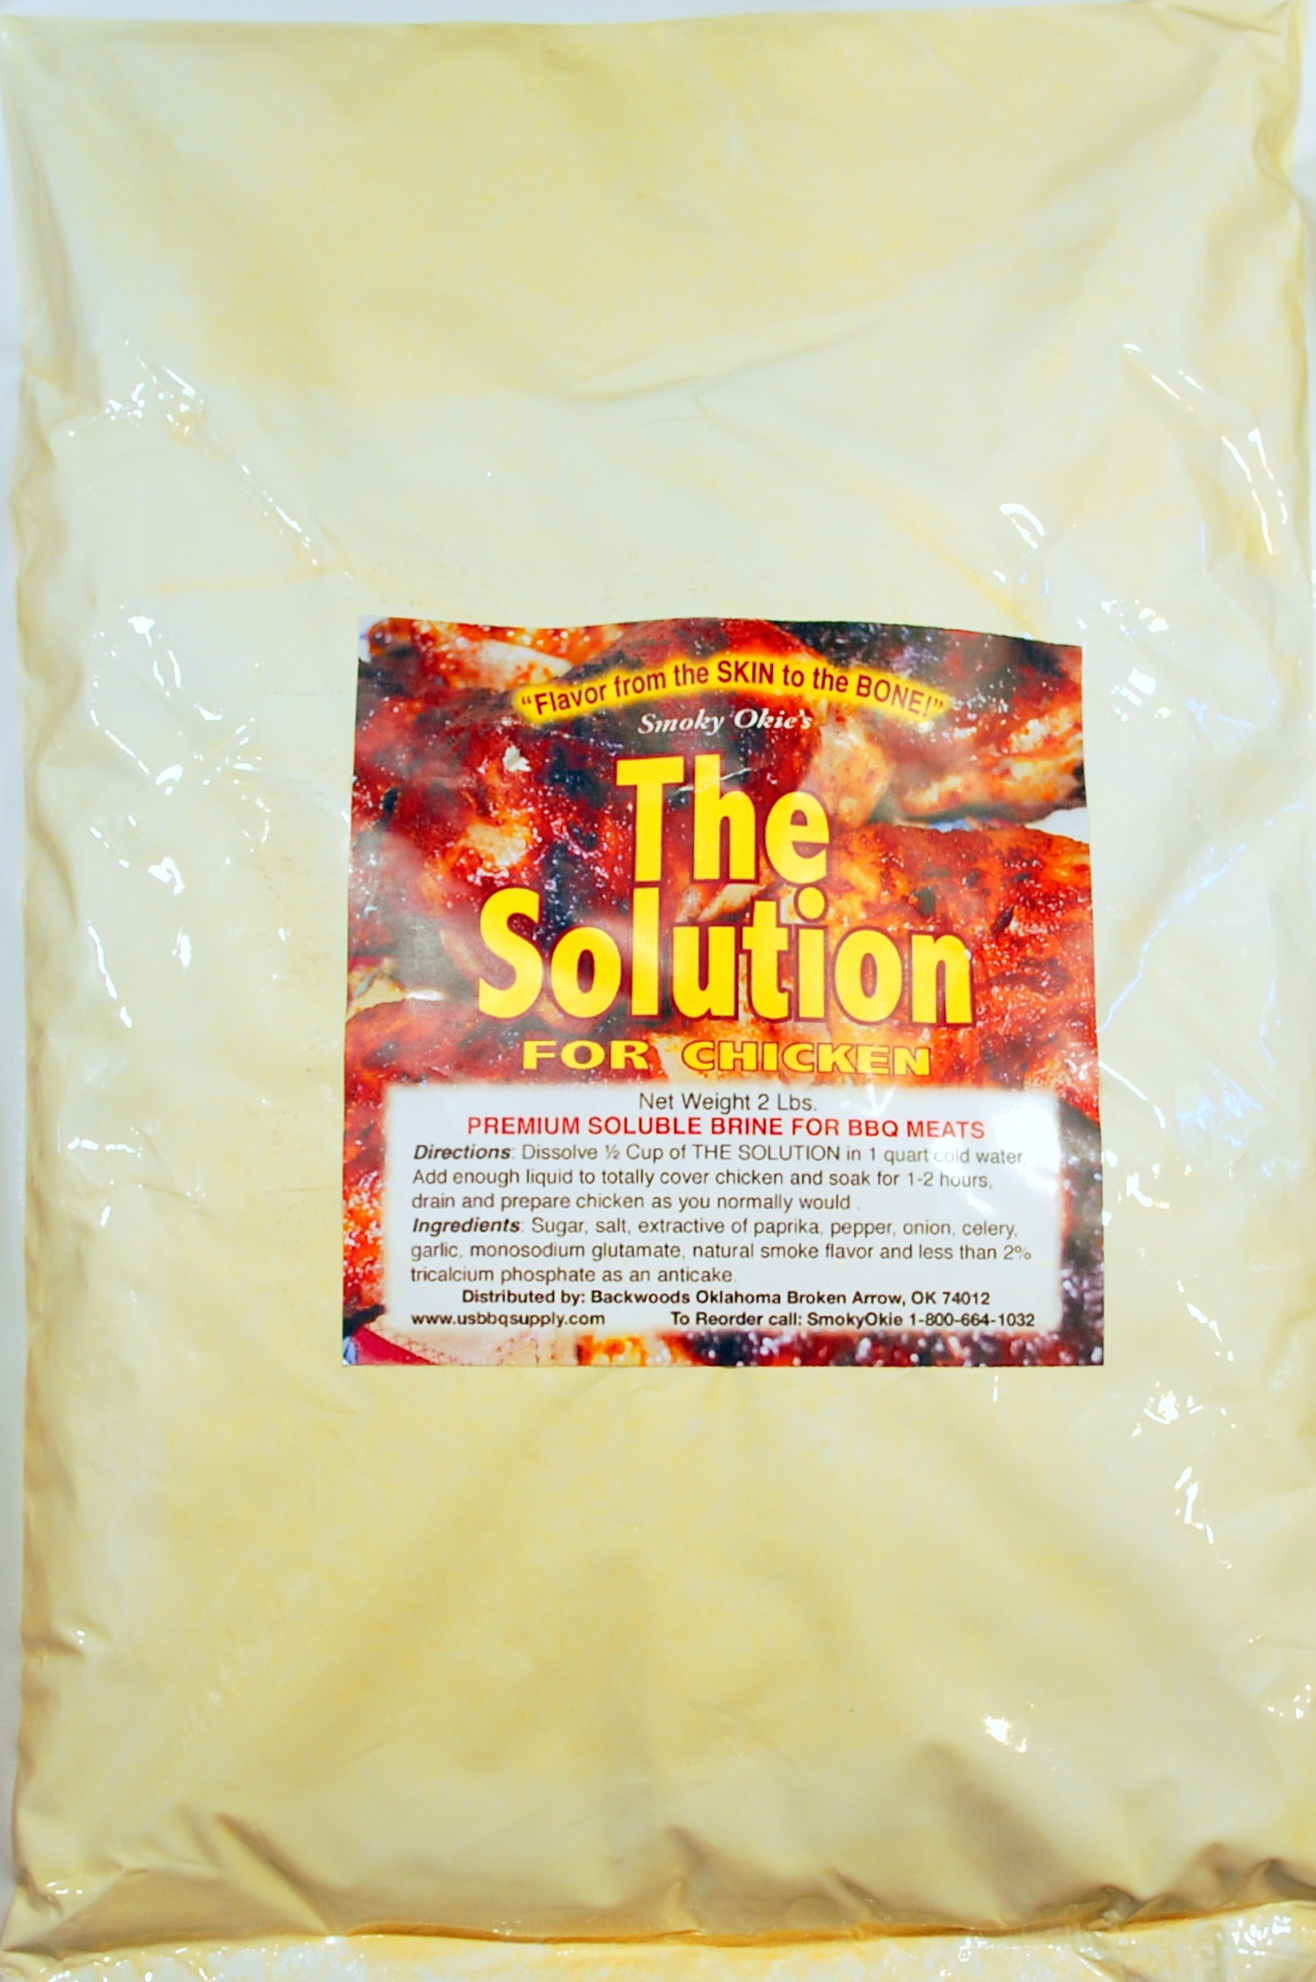 *THE SOLUTION FOR CHICKEN poultry brine 2 lb $24.50